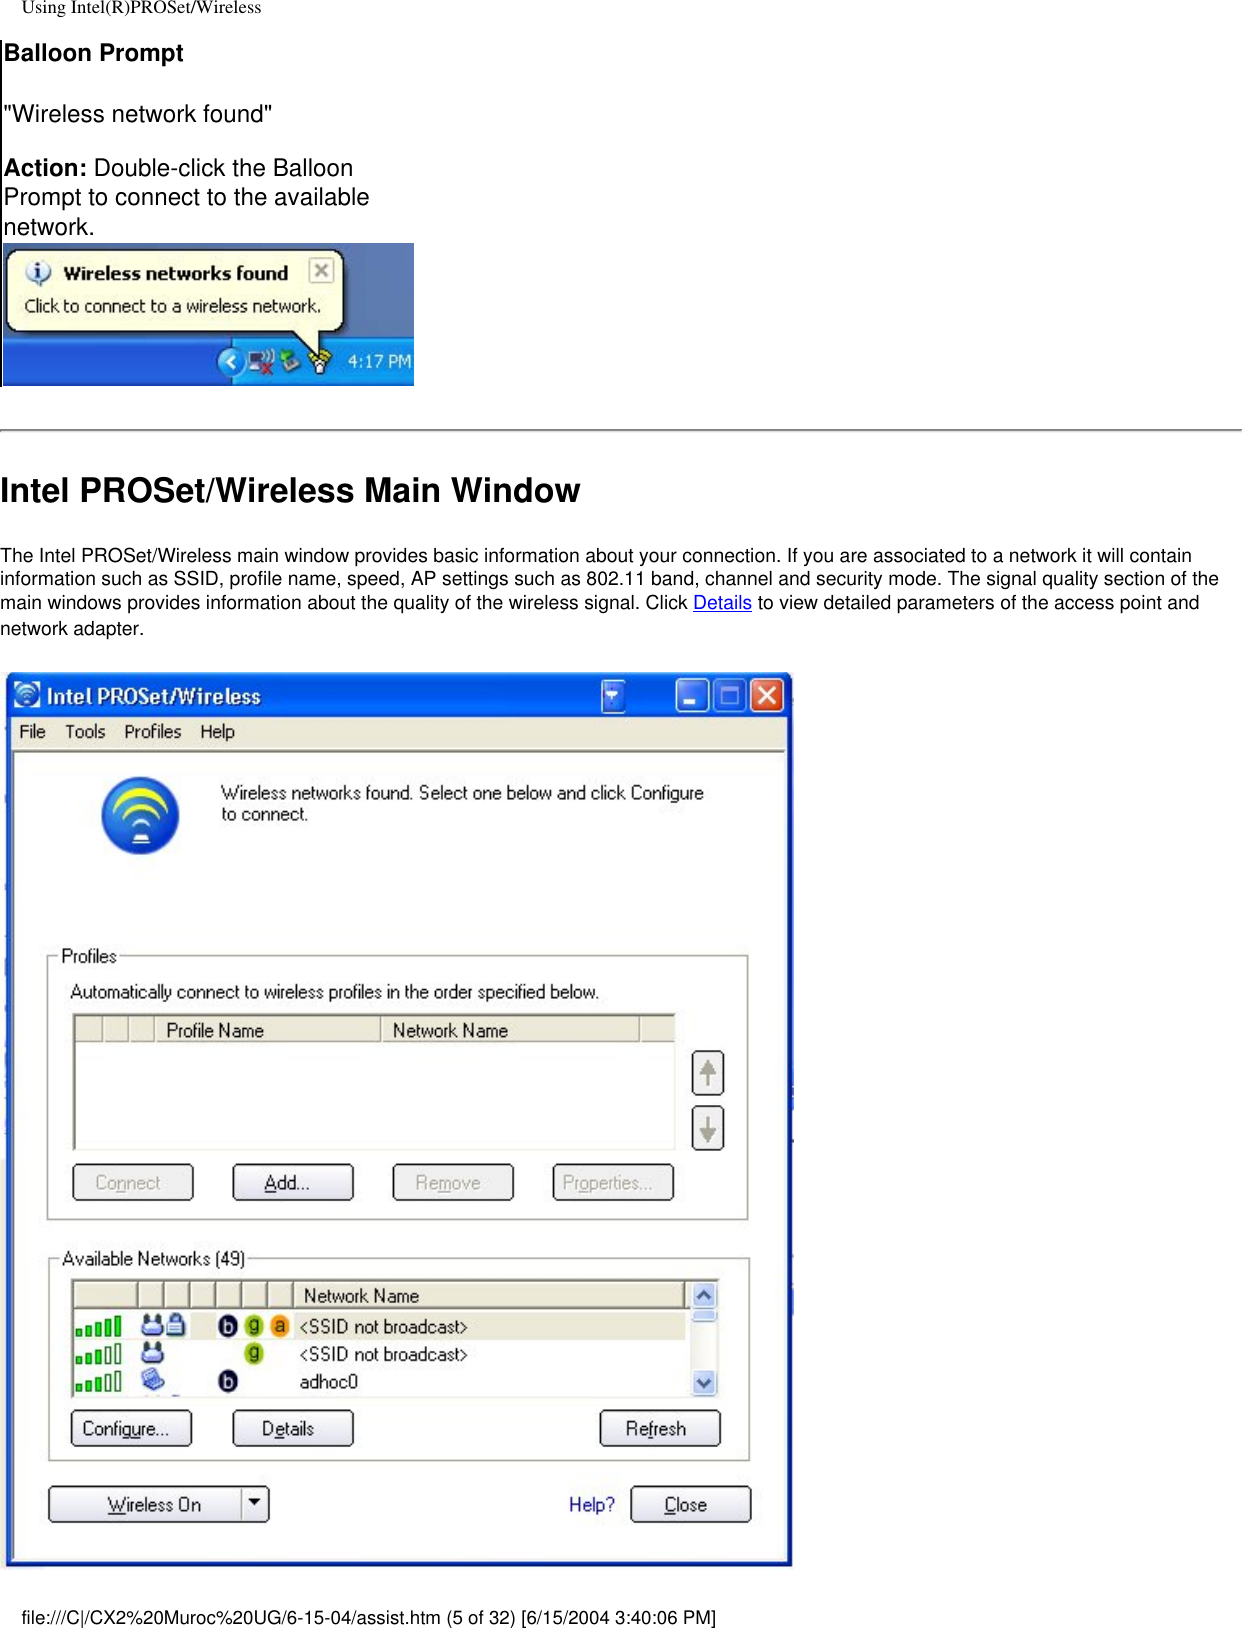 Using Intel(R)PROSet/WirelessBalloon Prompt&quot;Wireless network found&quot; Action: Double-click the Balloon Prompt to connect to the available network. Intel PROSet/Wireless Main WindowThe Intel PROSet/Wireless main window provides basic information about your connection. If you are associated to a network it will contain information such as SSID, profile name, speed, AP settings such as 802.11 band, channel and security mode. The signal quality section of the main windows provides information about the quality of the wireless signal. Click Details to view detailed parameters of the access point and network adapter.  file:///C|/CX2%20Muroc%20UG/6-15-04/assist.htm (5 of 32) [6/15/2004 3:40:06 PM]